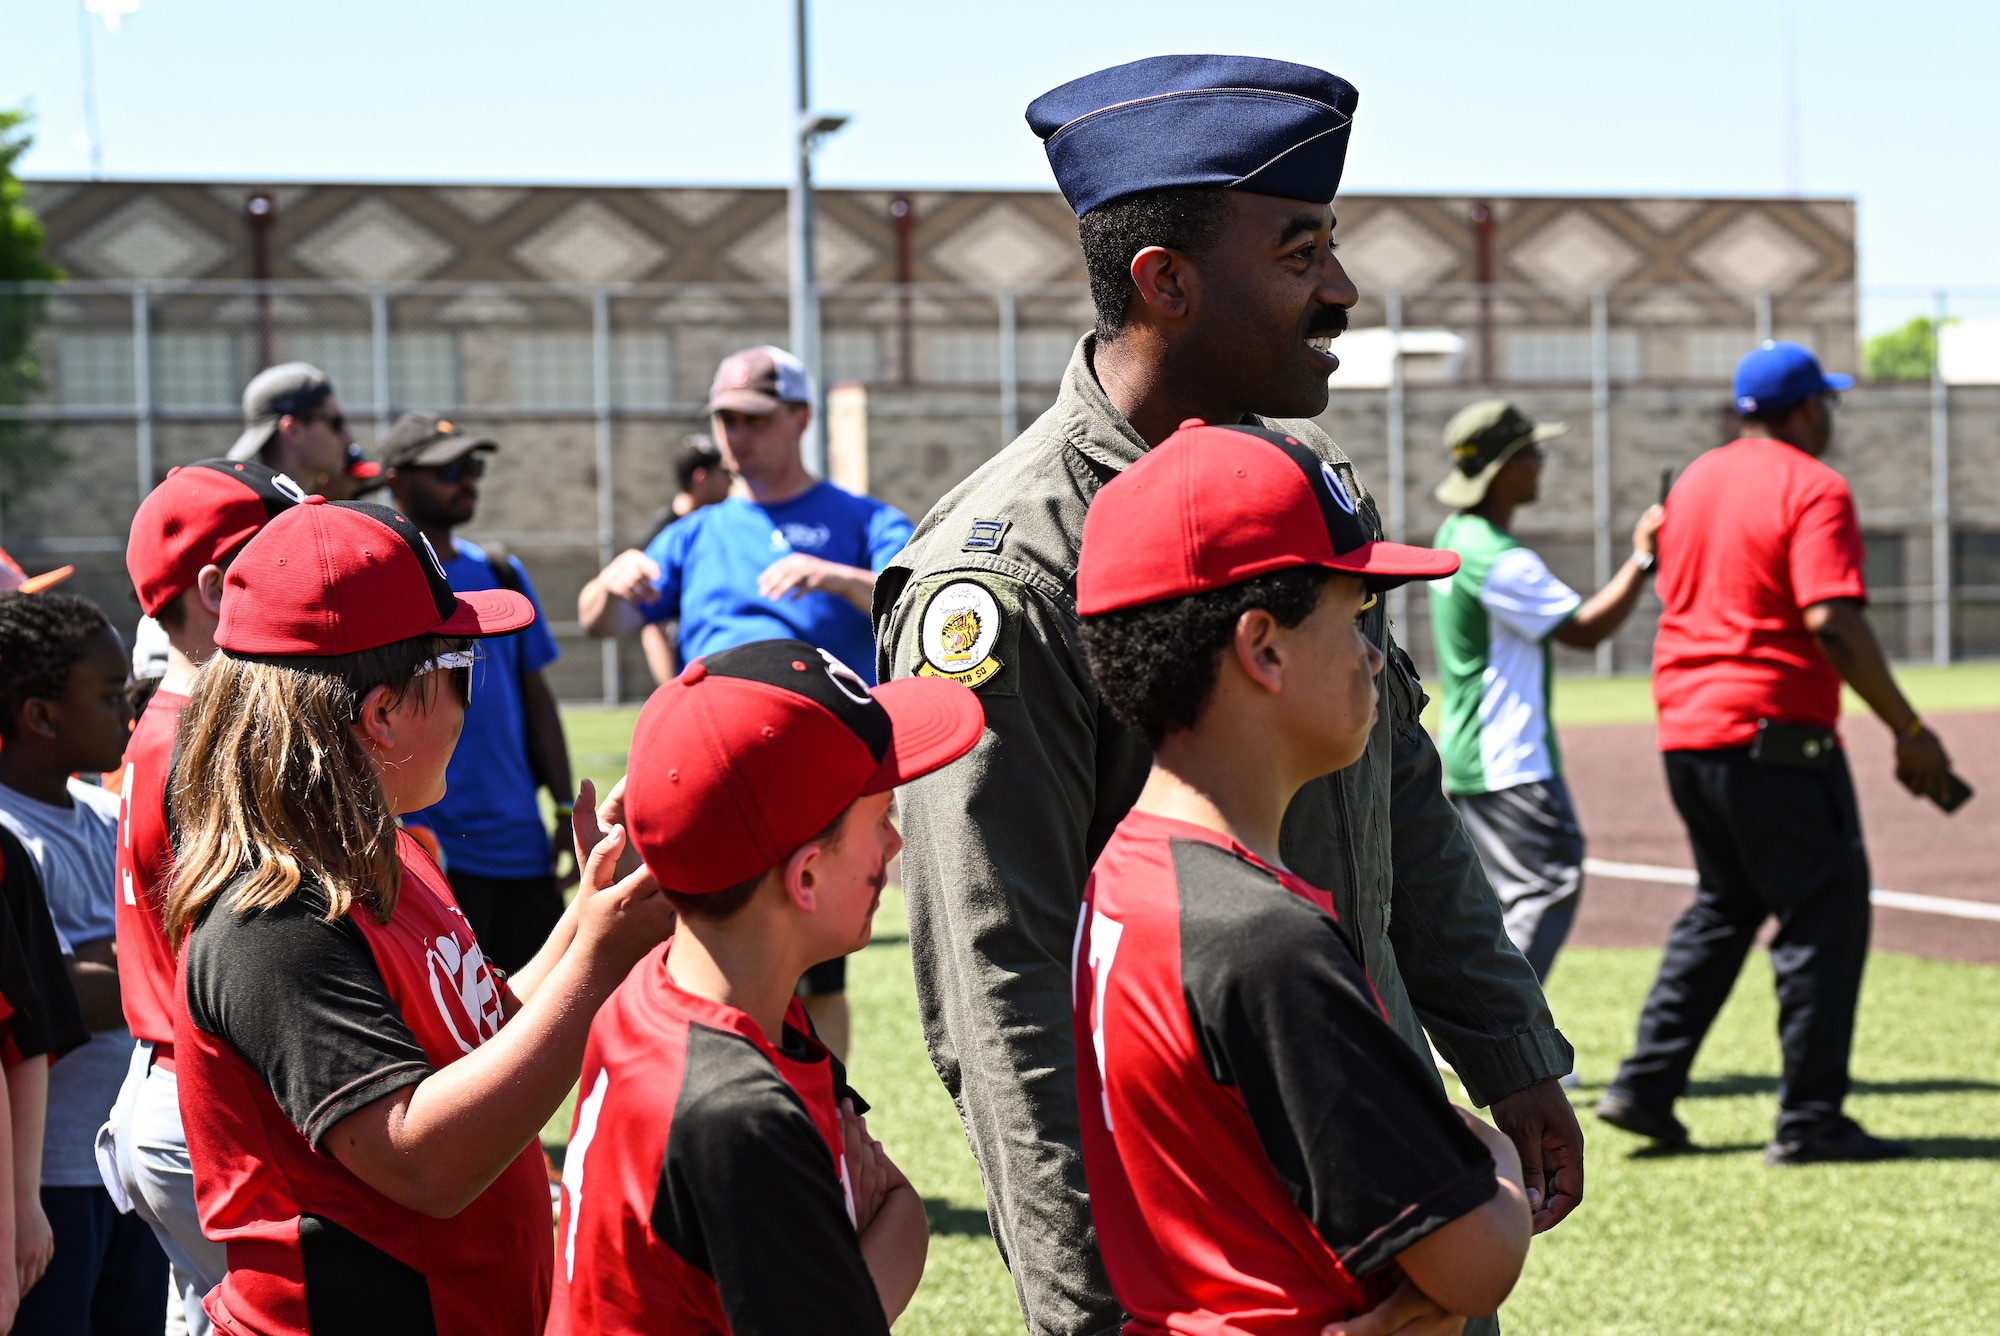 A U.S. Air Force B-2 Spirit pilot engages with youth baseball teams during the Diversity in the Dugout event at the Kansas City Royals Urban Youth Academy, Missouri, May 14, 2022. The pilot assigned to Whiteman was invited to talk about hardships he faced as a young black man and overcoming negative views of diversity of those around him. This Juneteenth linked event is designed to educate kids on the importance of understanding diversity in a fun environment. (U.S. Air Force photo by Airman 1st Class Victoria Hommel)